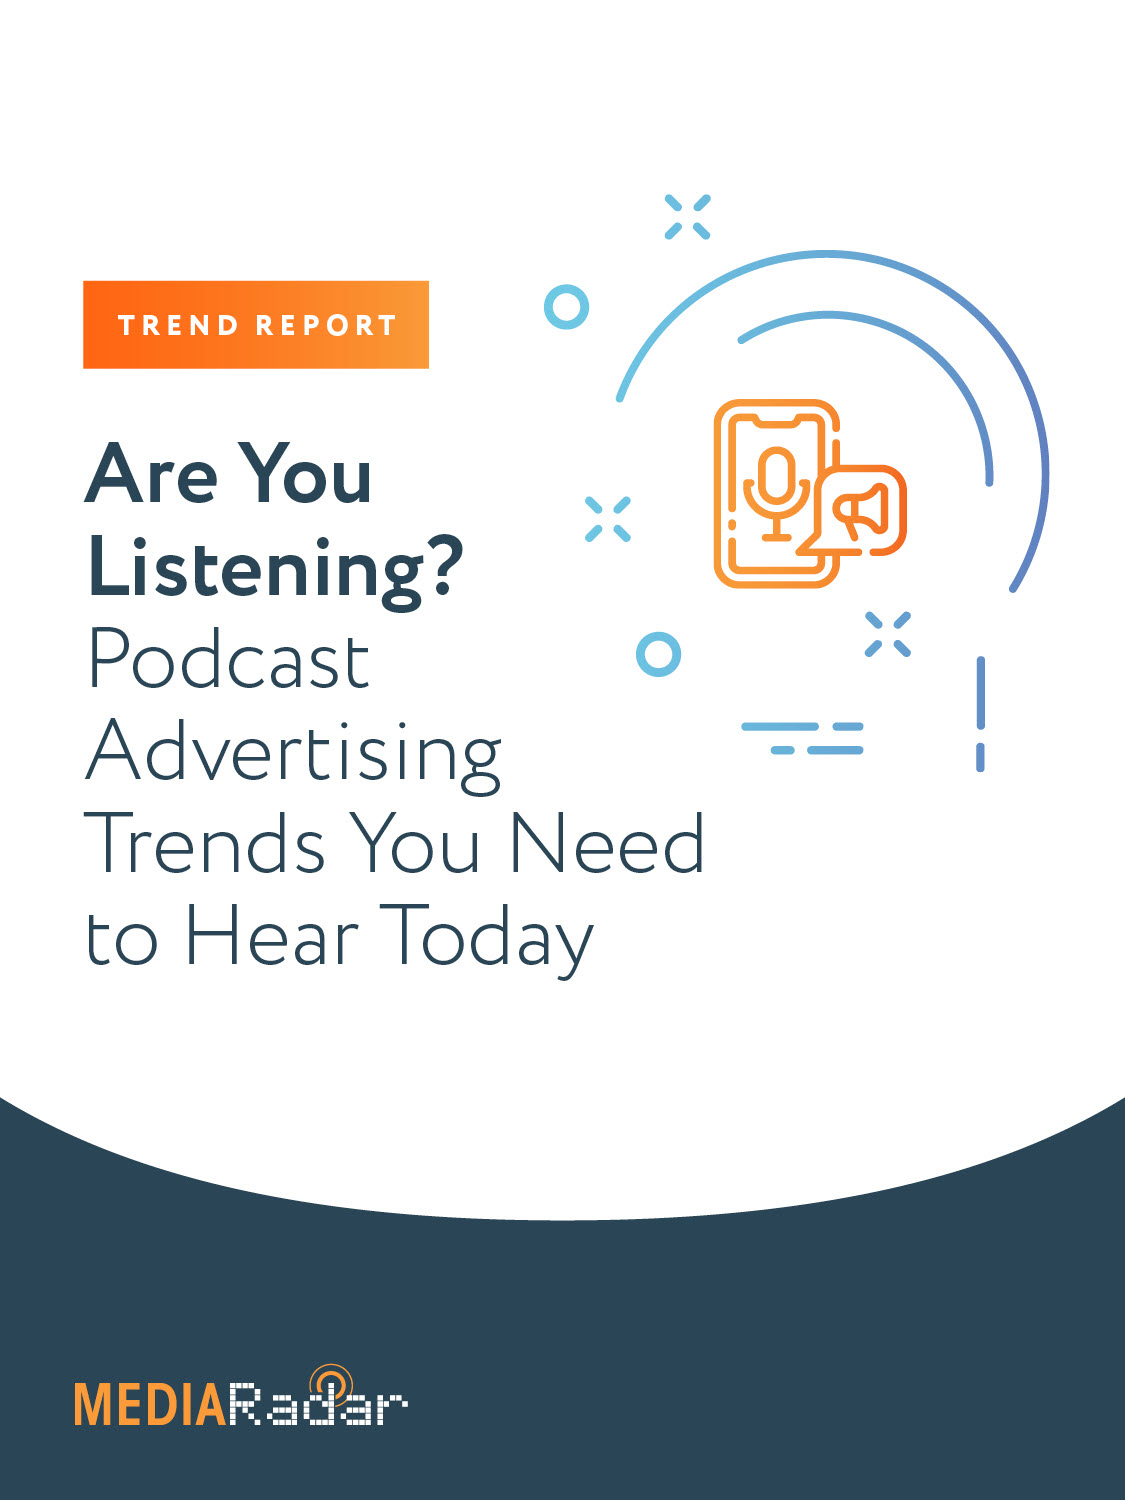 Podcast Advertising Trends You Need to Hear Today - Trend Report